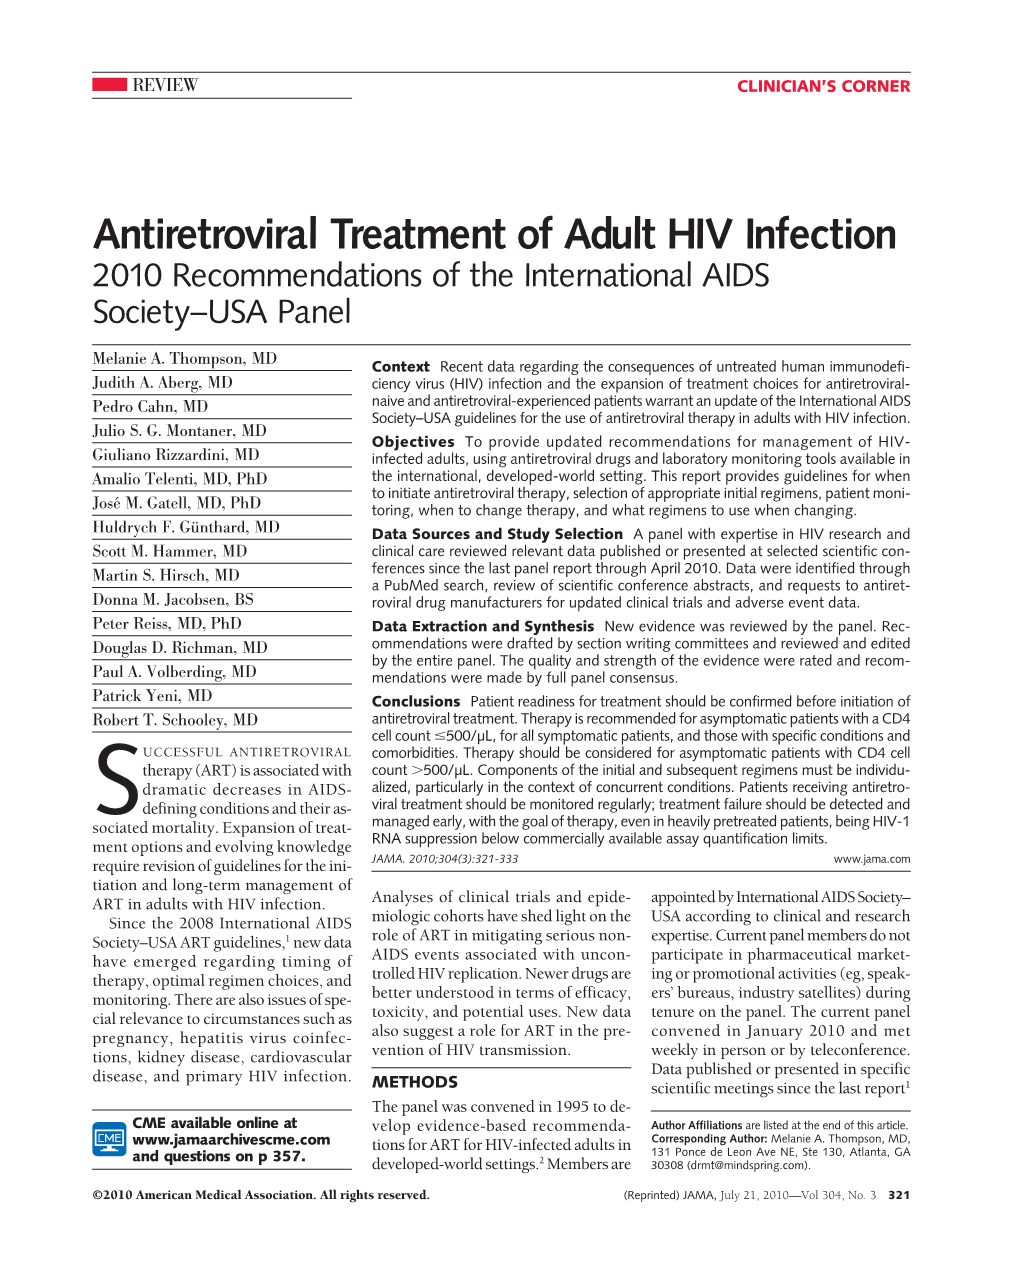 Antiretroviral Treatment of Adult HIV Infection 2010 Recommendations of the International AIDS Society–USA Panel